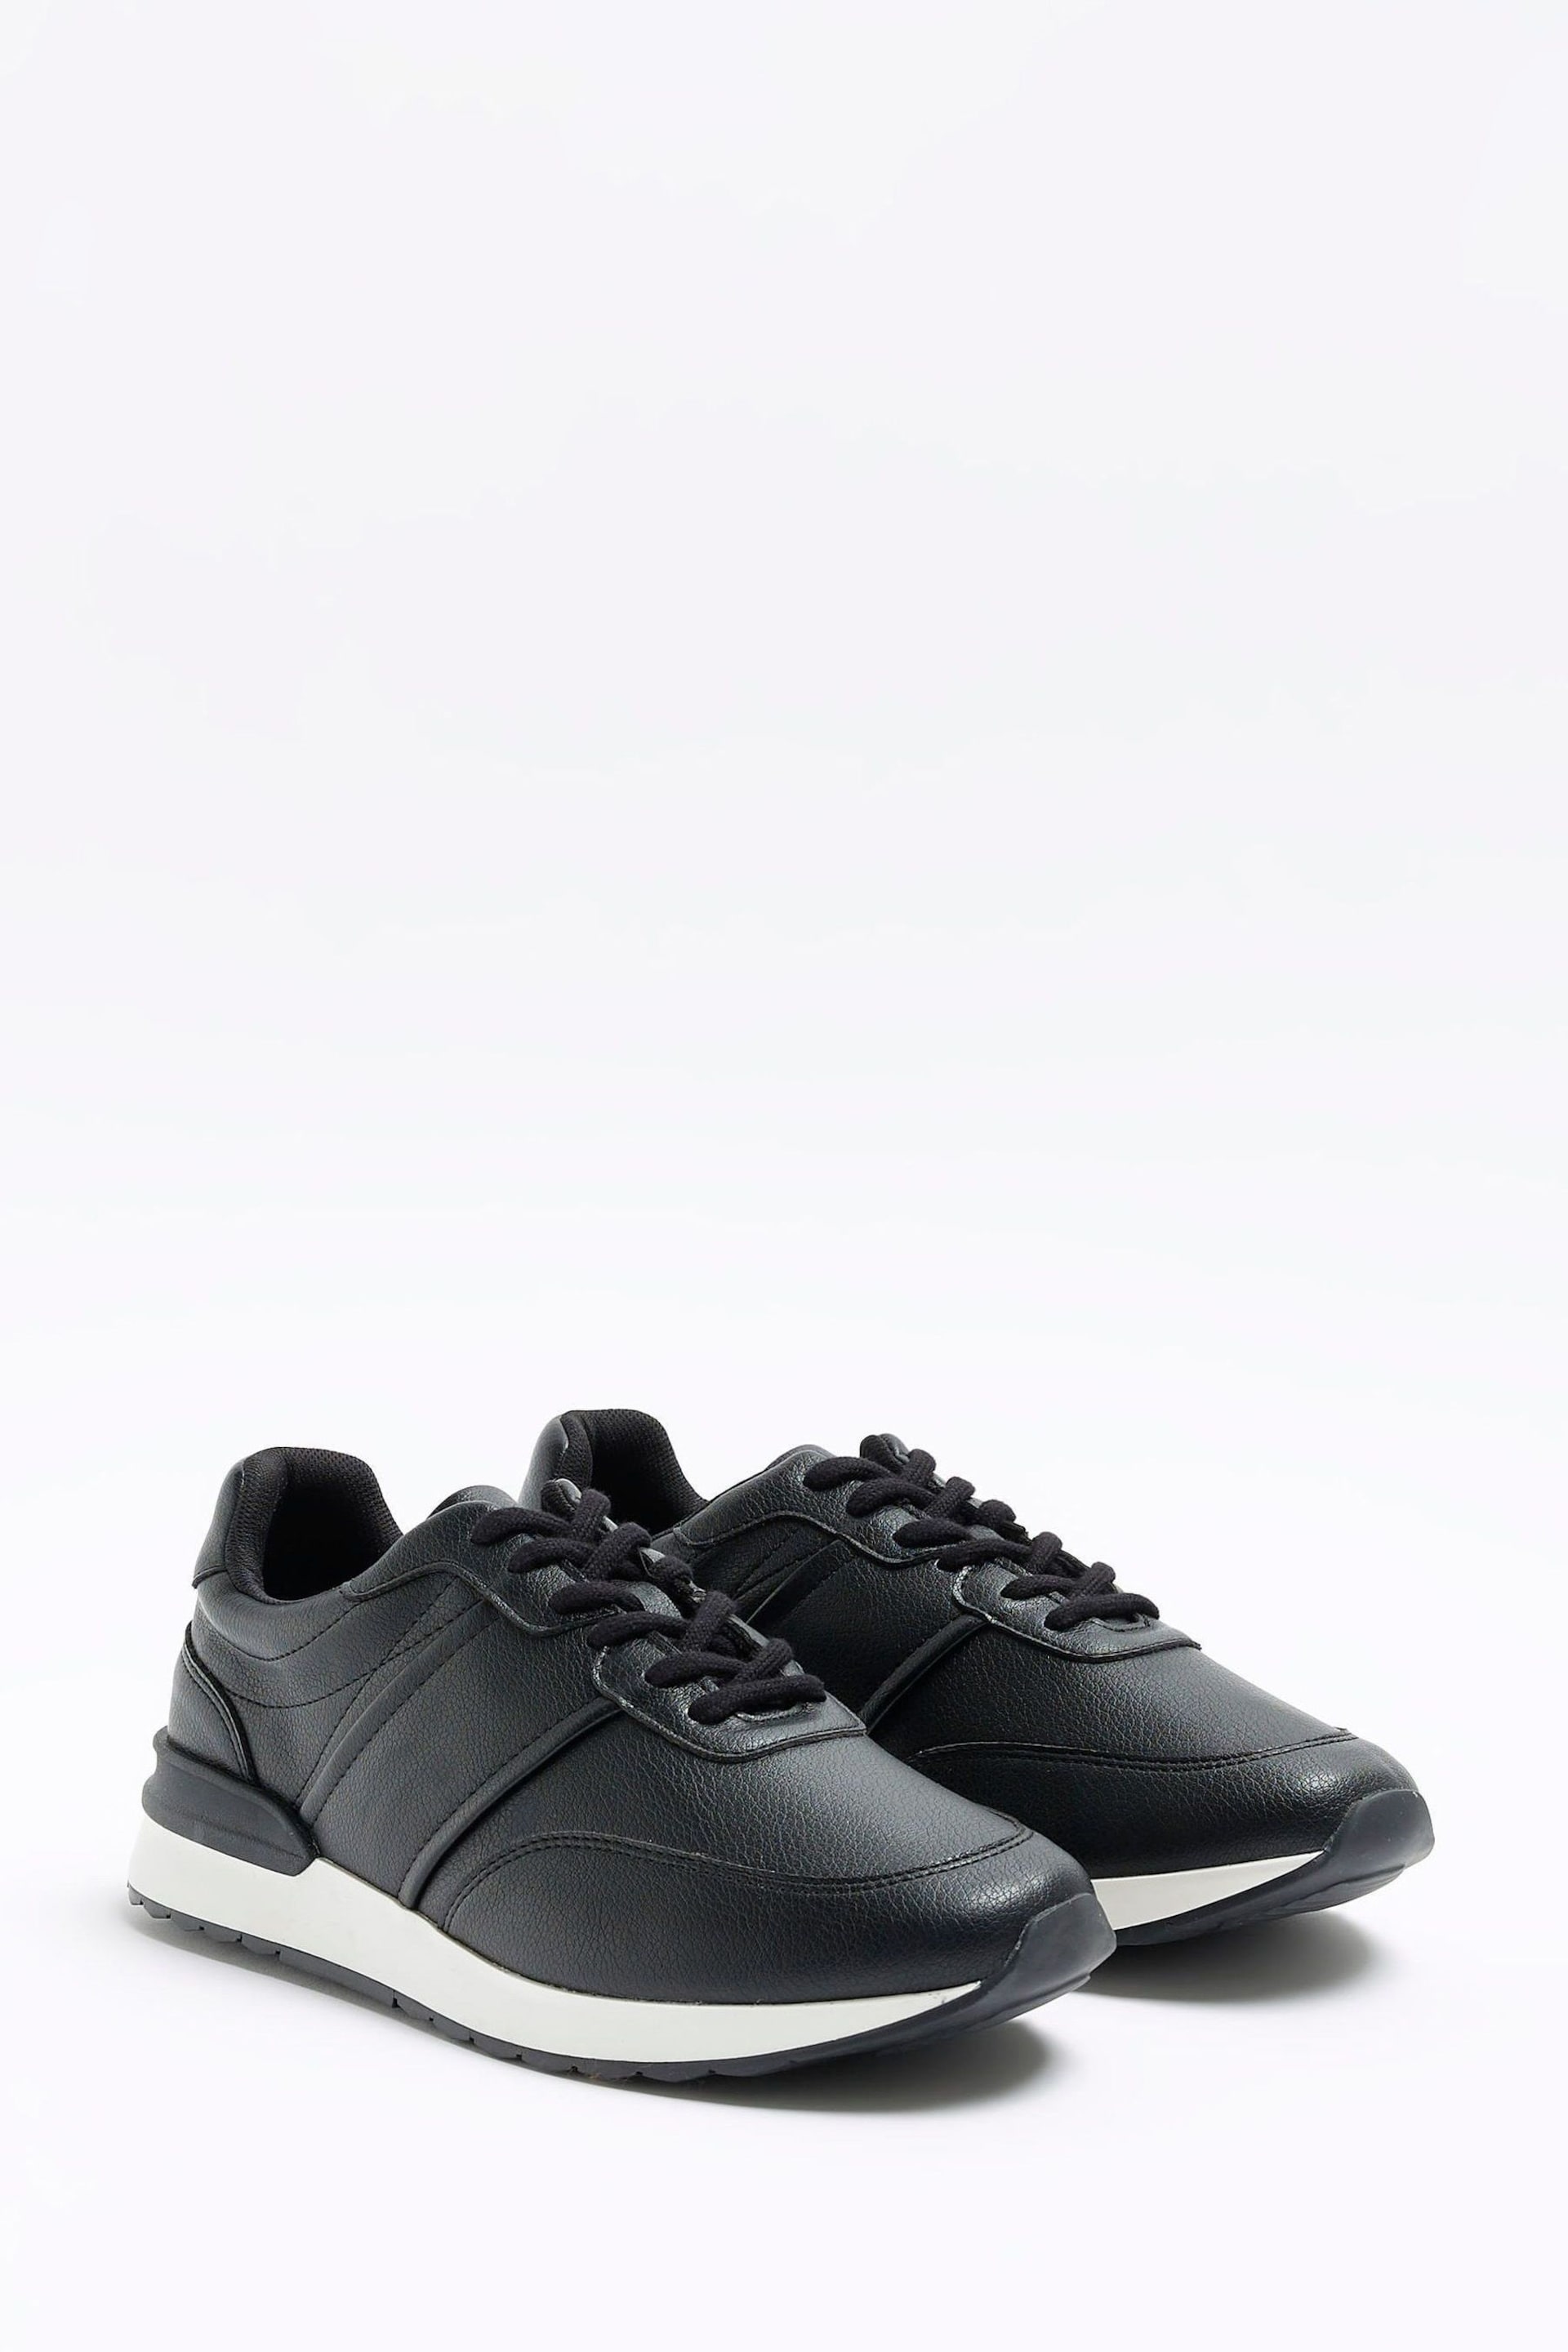 River Island Black Lace-Up Chunky Runner Trainers - Image 2 of 4